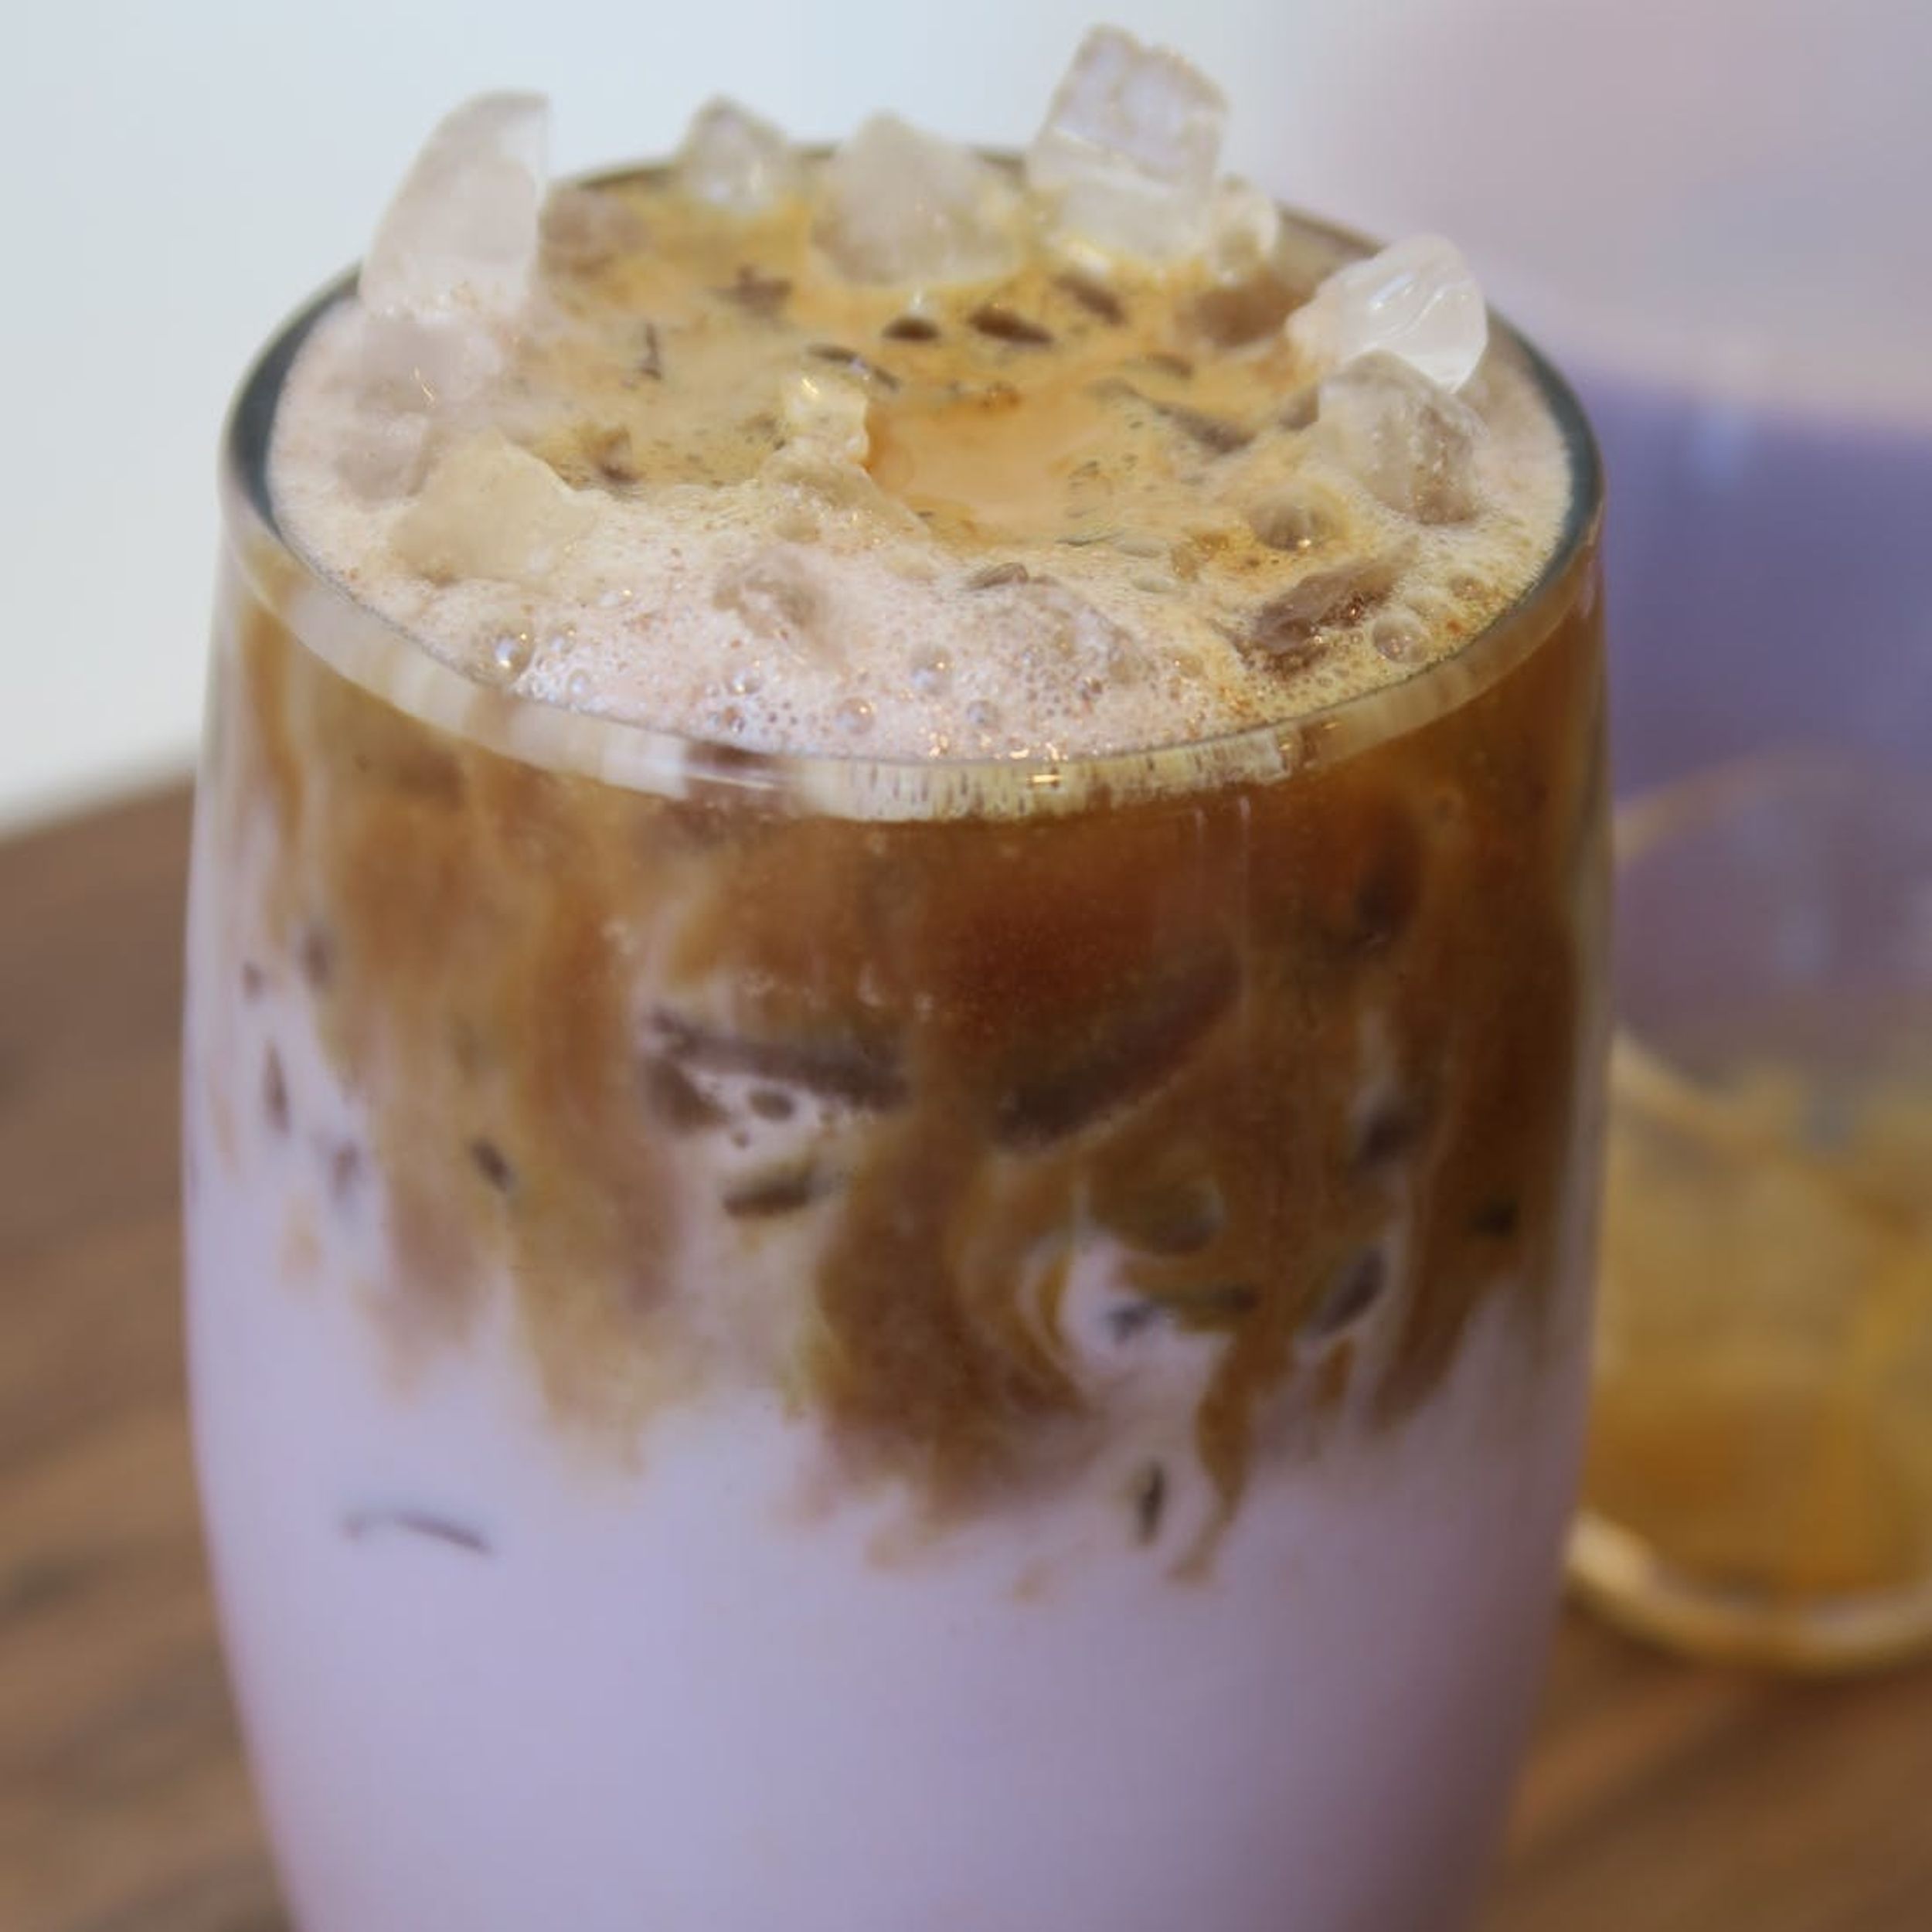 Purple Is the New Black With This Dreamy Ube (Yam) Latte Recipe